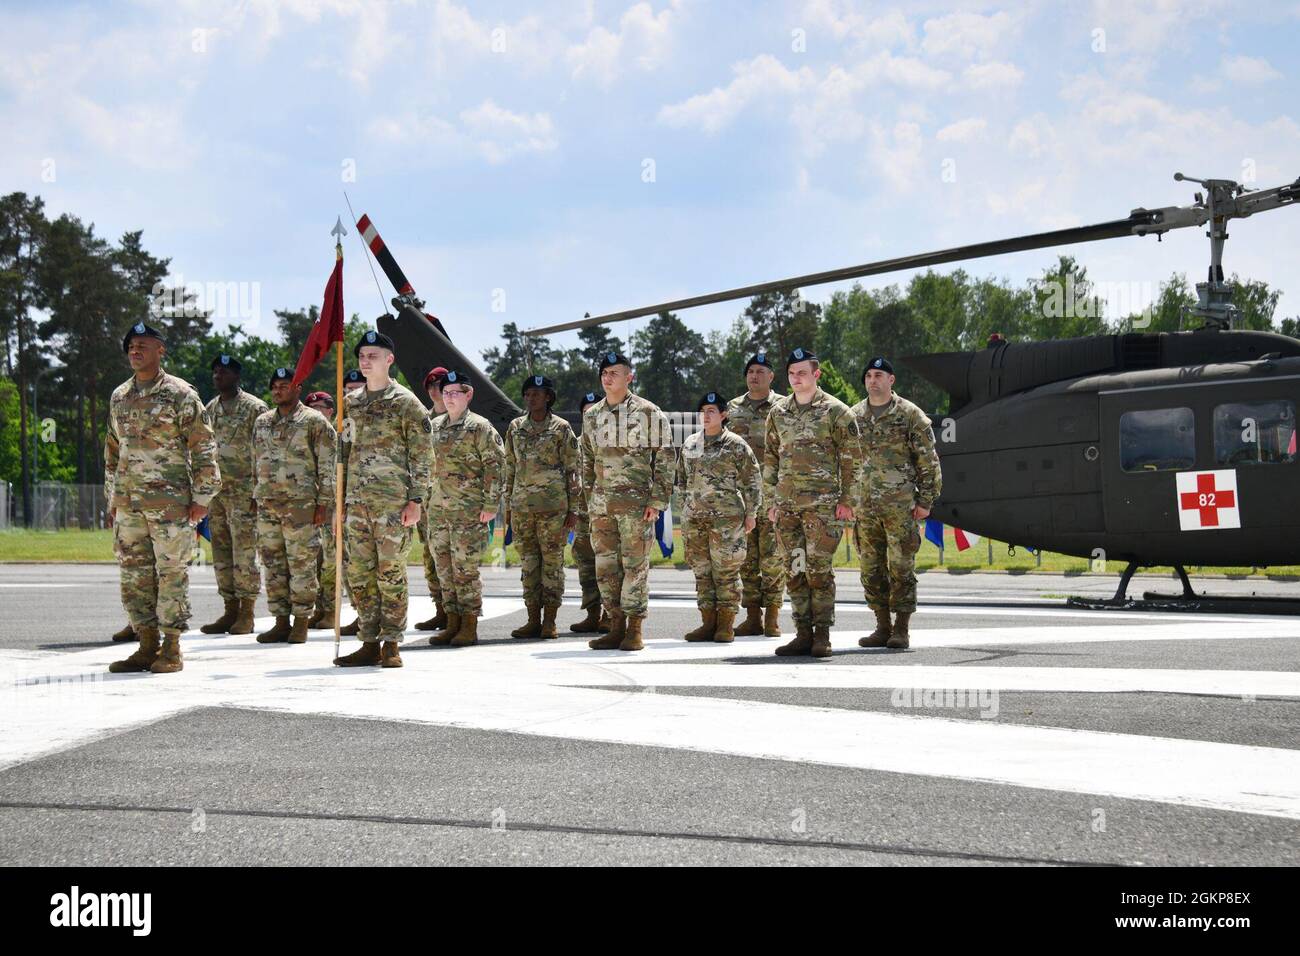 Members of U.S. Army Health Clinic Grafenwoehr await the start of the change of command ceremony as Lt. Col. Crista Wagner assumes command of the USAHC Grafenwoehr from Lt. Col. Avery J. Carney at Tower Barracks, Grafenwoehr, Germany, June 11, 2021,. Stock Photo